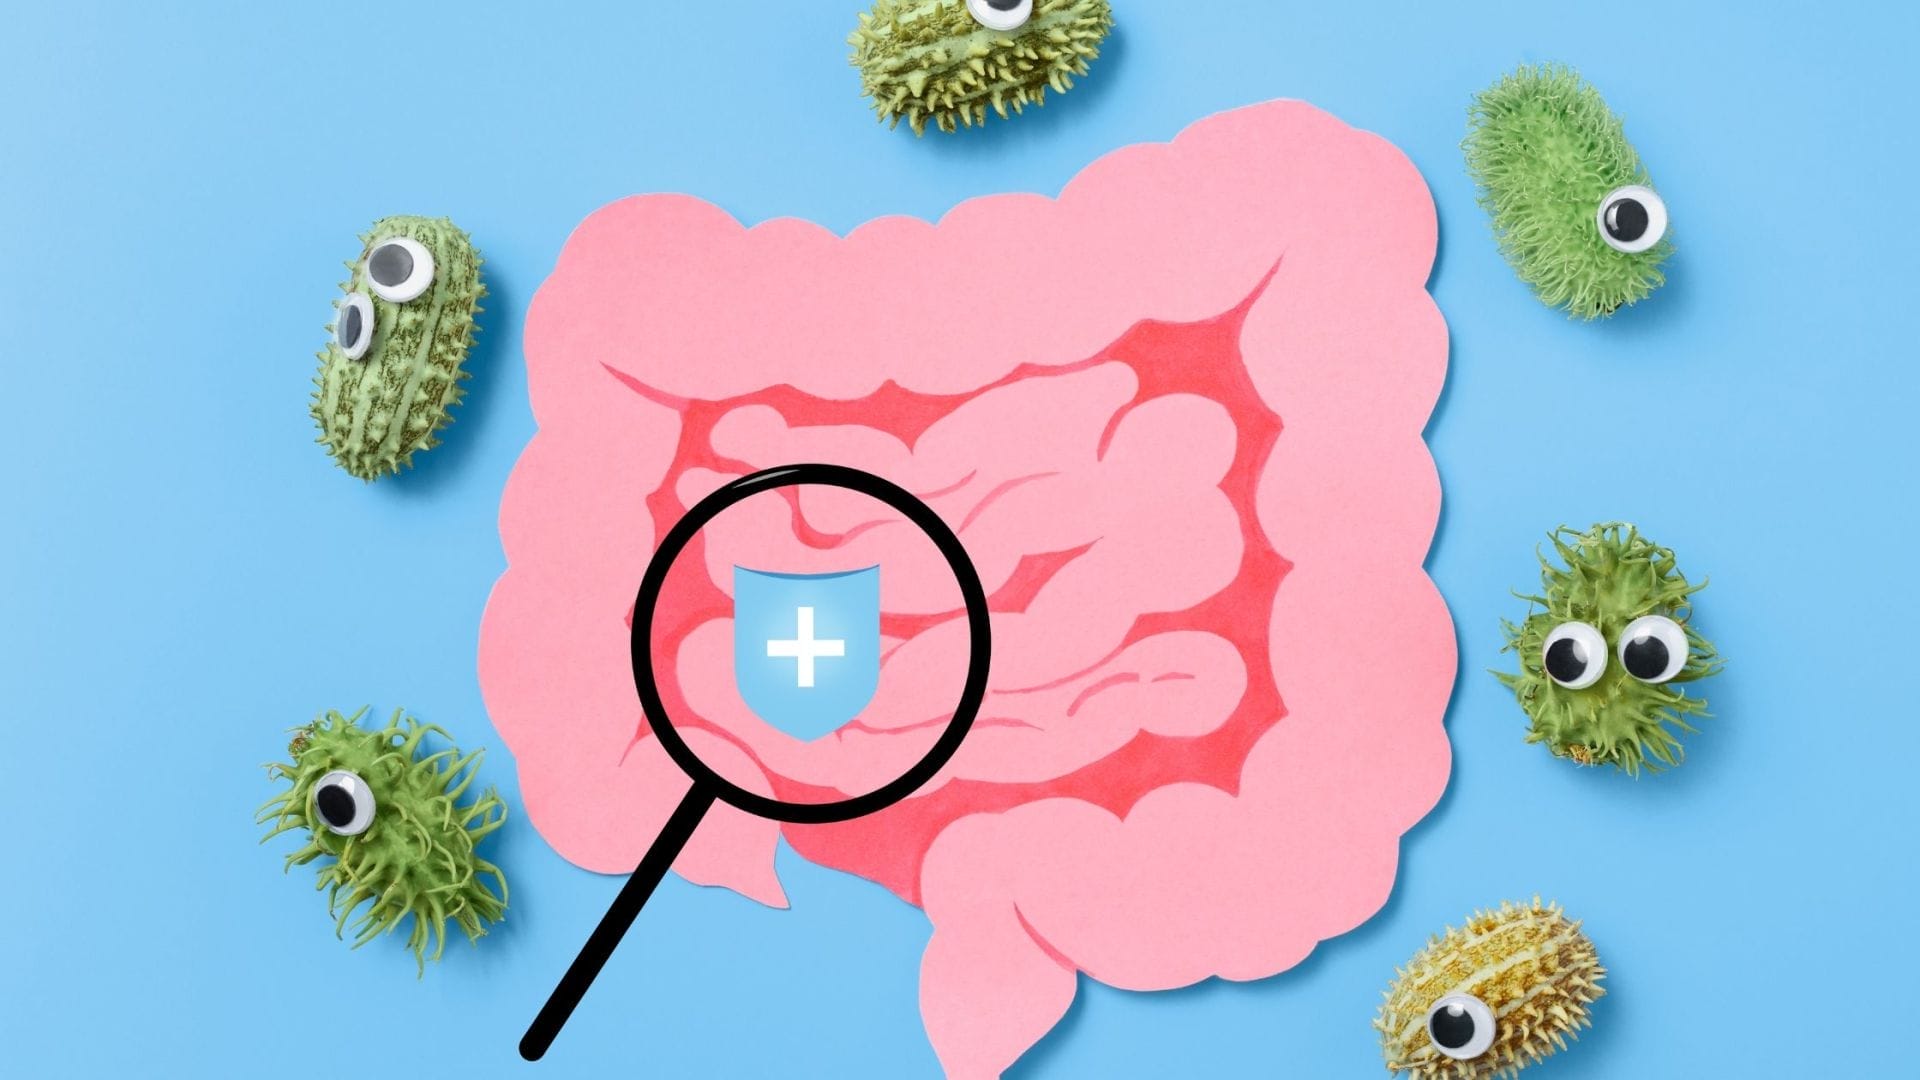  A playful and creative representation of stomach health, with a pink paper cutout of the digestive tract focused under a magnifying glass that reveals a shield with a plus sign, symbolizing protection or treatment. Surrounding the intestines are quirky, green germ-like figures with googly eyes, suggesting the presence of harmful bacteria or illness. This image is likely associated with content discussing the financial aspects of safeguarding against or addressing stomach cancer, indicating an interest in the economics of stomach cancer care.